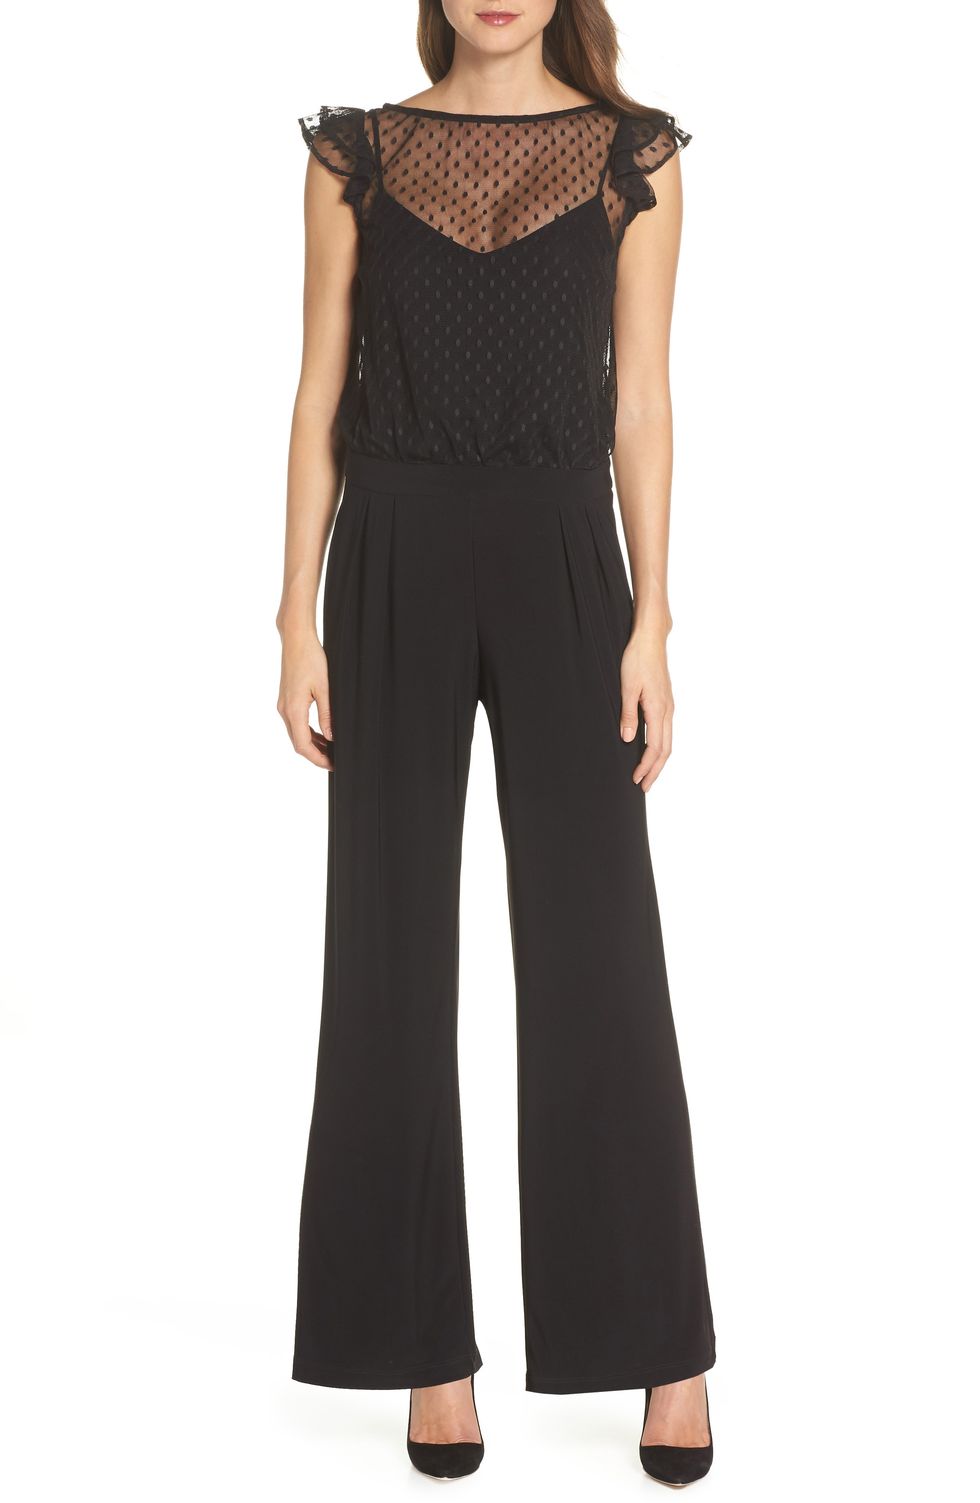 A Sexy Black Jumpsuit That'll Become Your New LBD